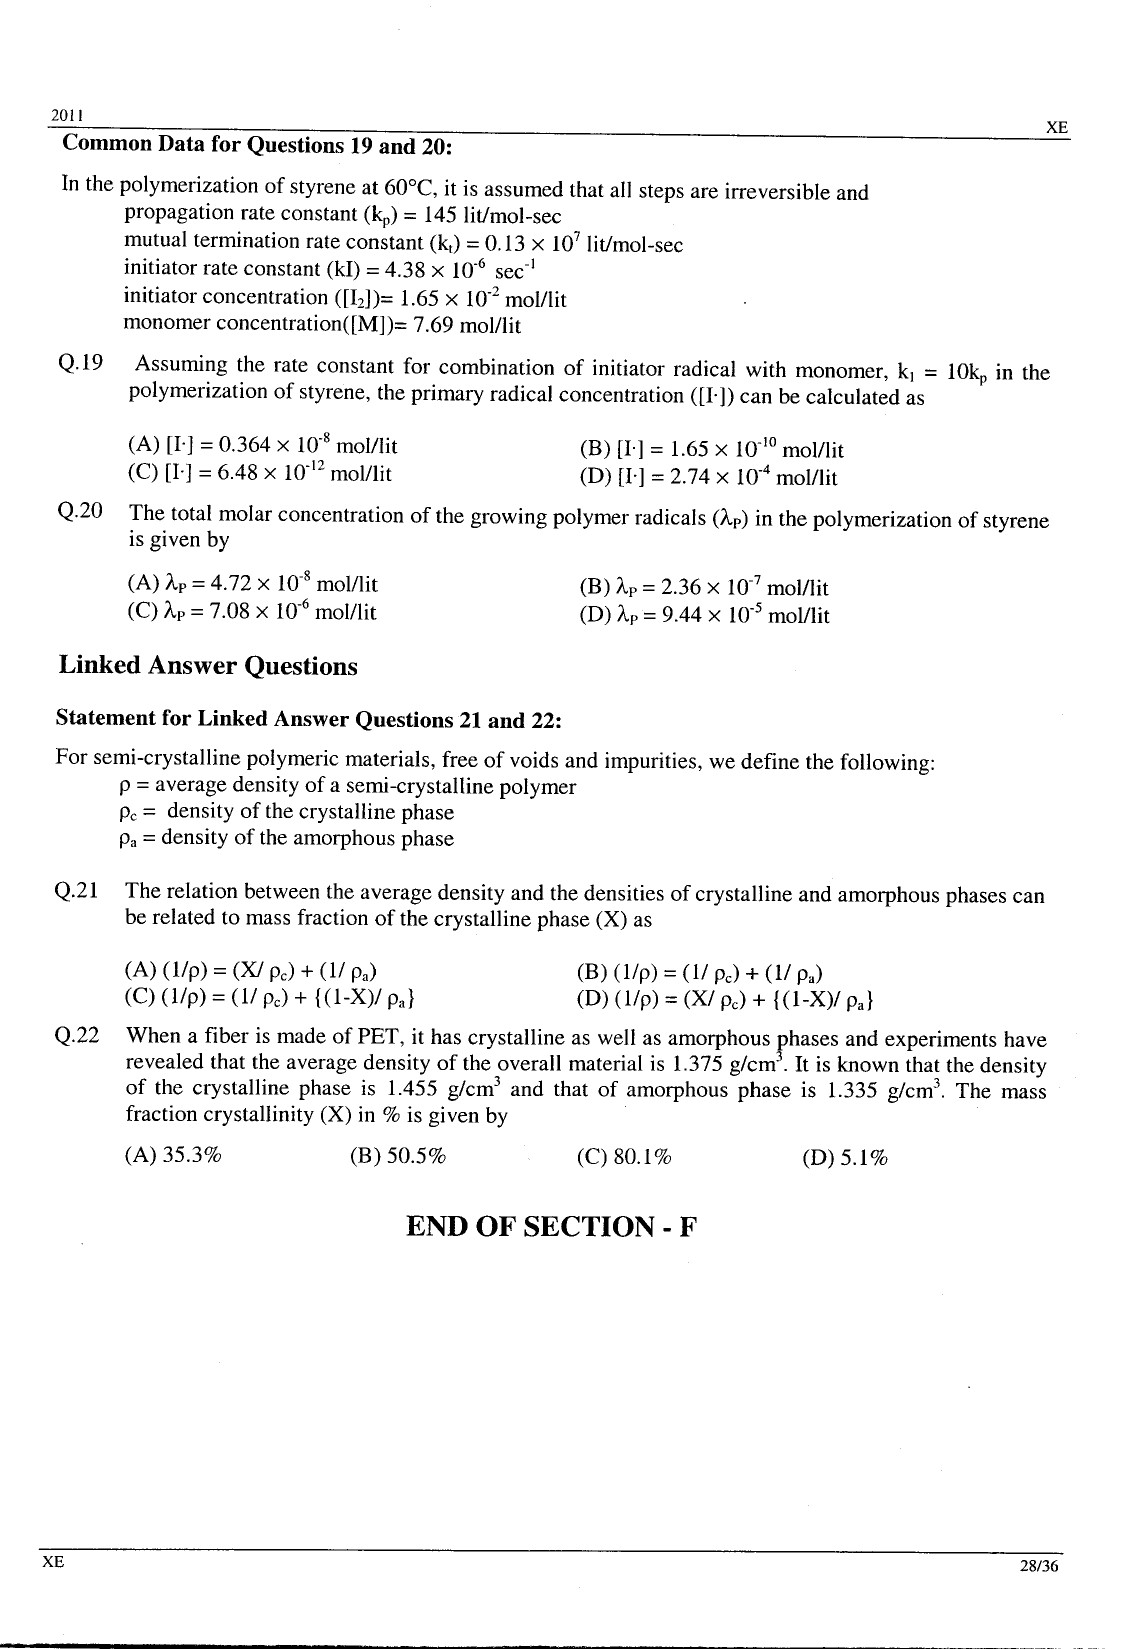 GATE Exam Question Paper 2011 Engineering Sciences 28